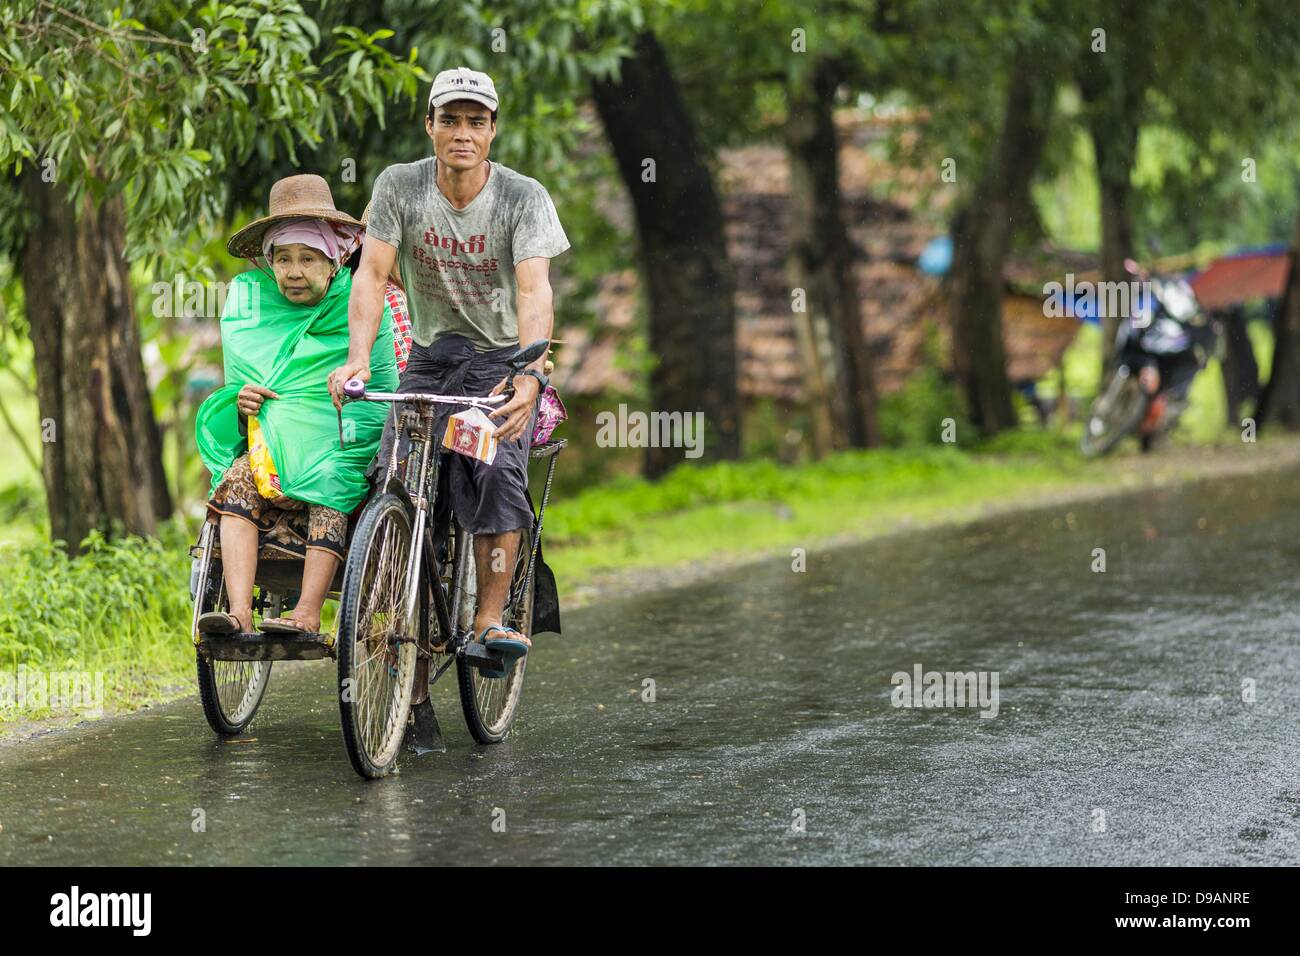 June 14, 2013 - Pantanaw, Ayeyarwady, Union of Myanmar - A gets a ride in a pedicab in the rain along Highway 5 in Pantanaw, Ayeyarwady, in the Irrawaddy delta region of Myanmar. This region of Myanmar was devastated by cyclone Nargis in 2008 but daily life has resumed and it is now a leading rice producing region. (Credit Image: © Jack Kurtz/ZUMAPRESS.com) Stock Photo